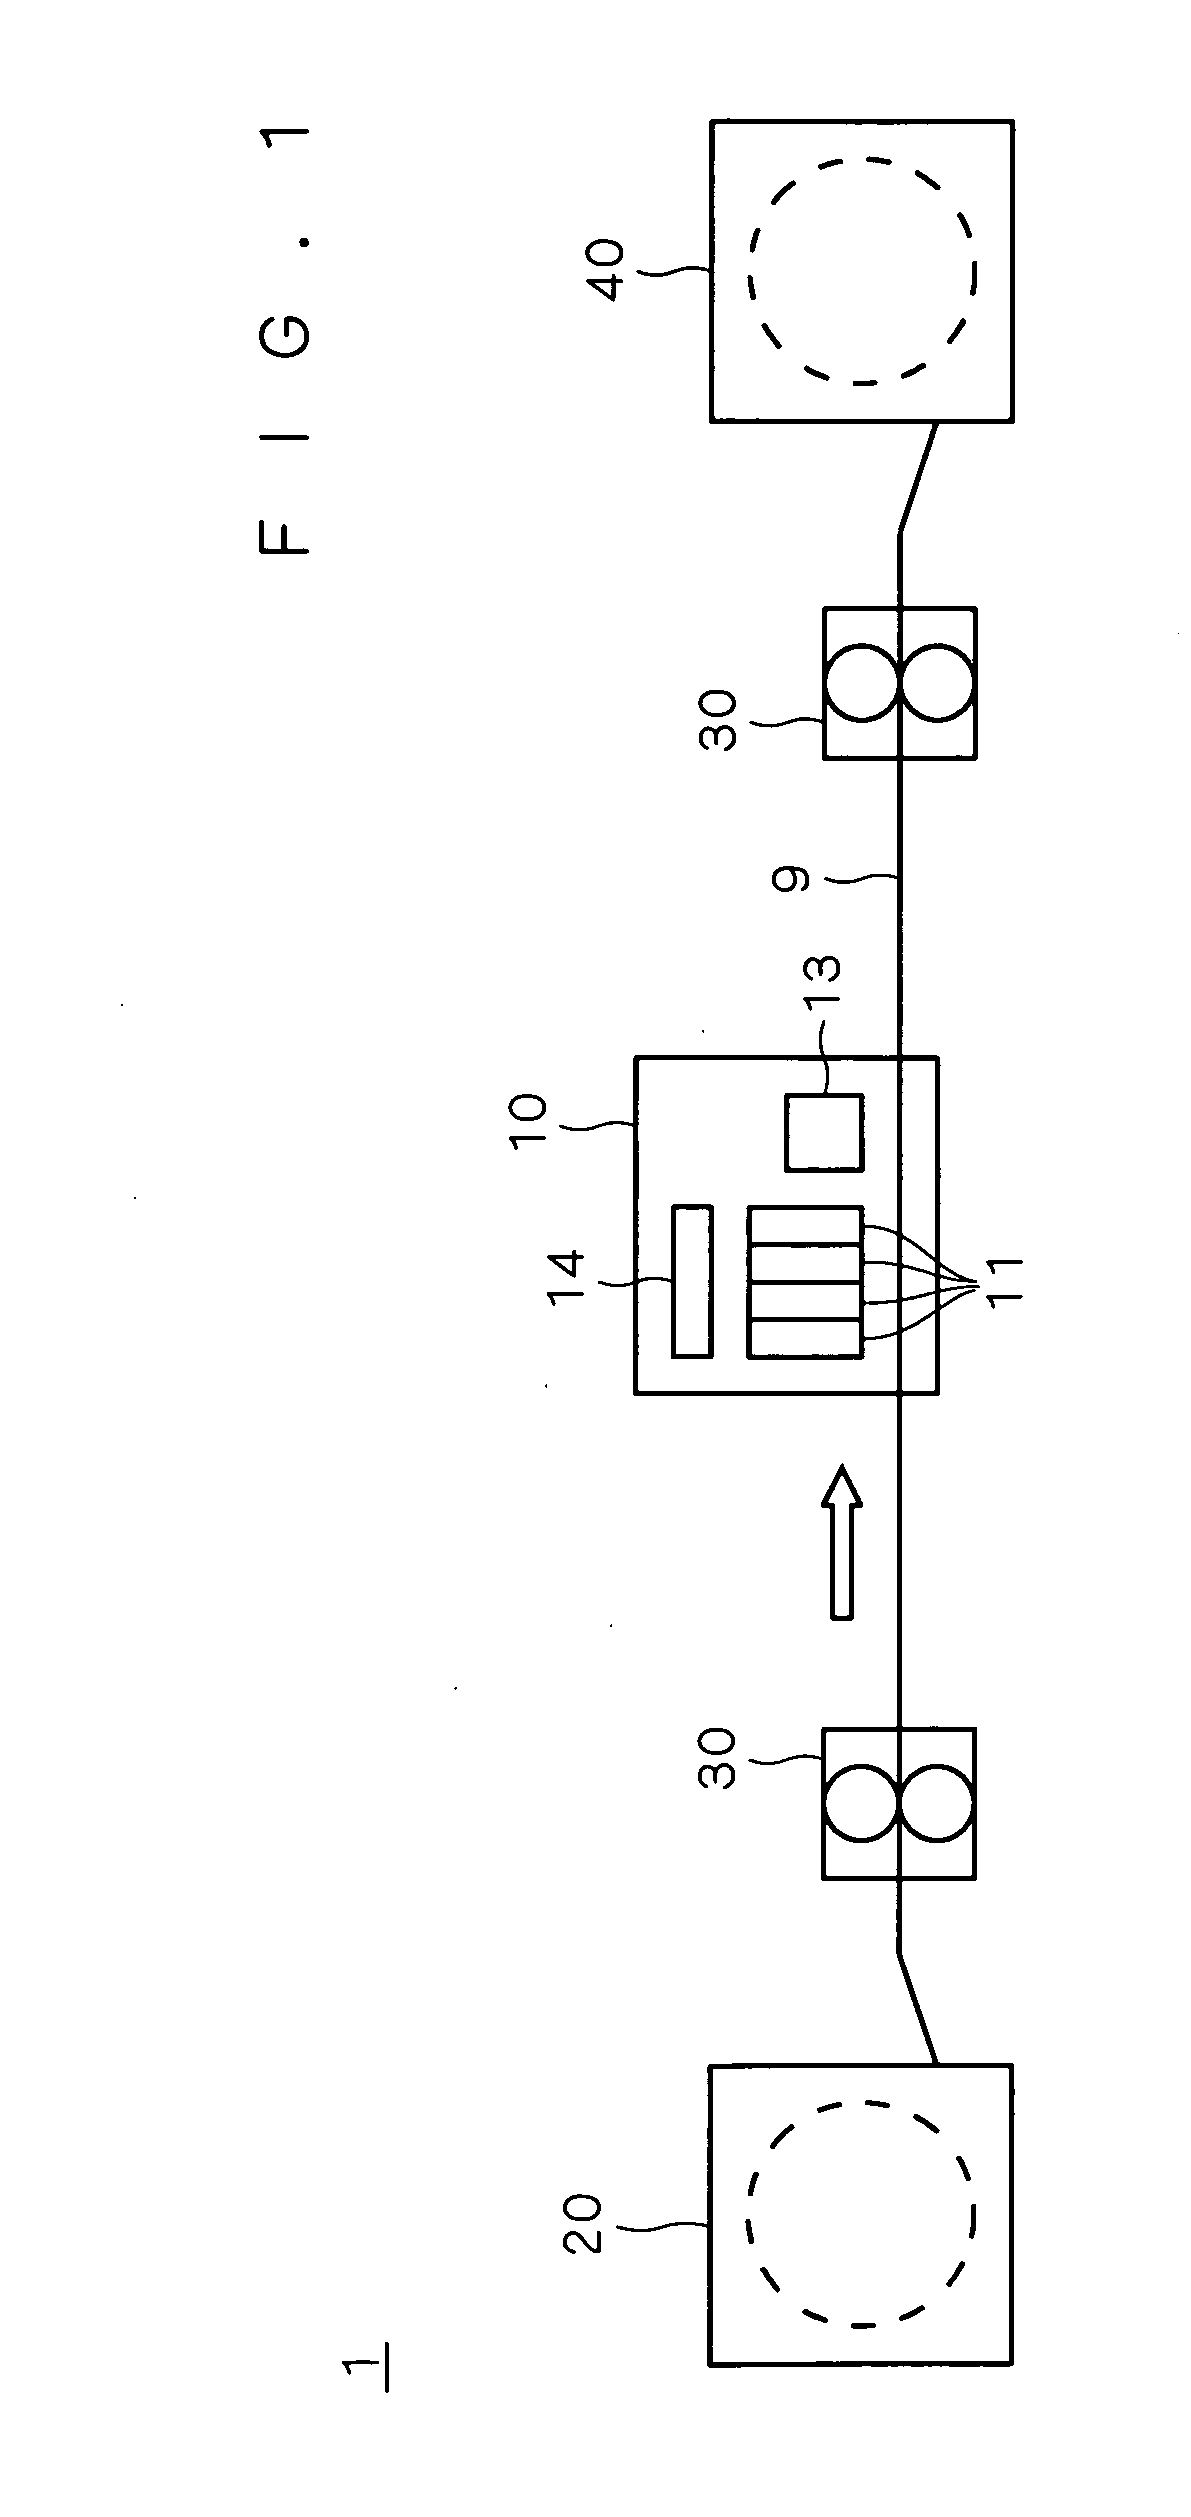 Printing apparatus, method of inspecting nozzles for abnormalities, and program